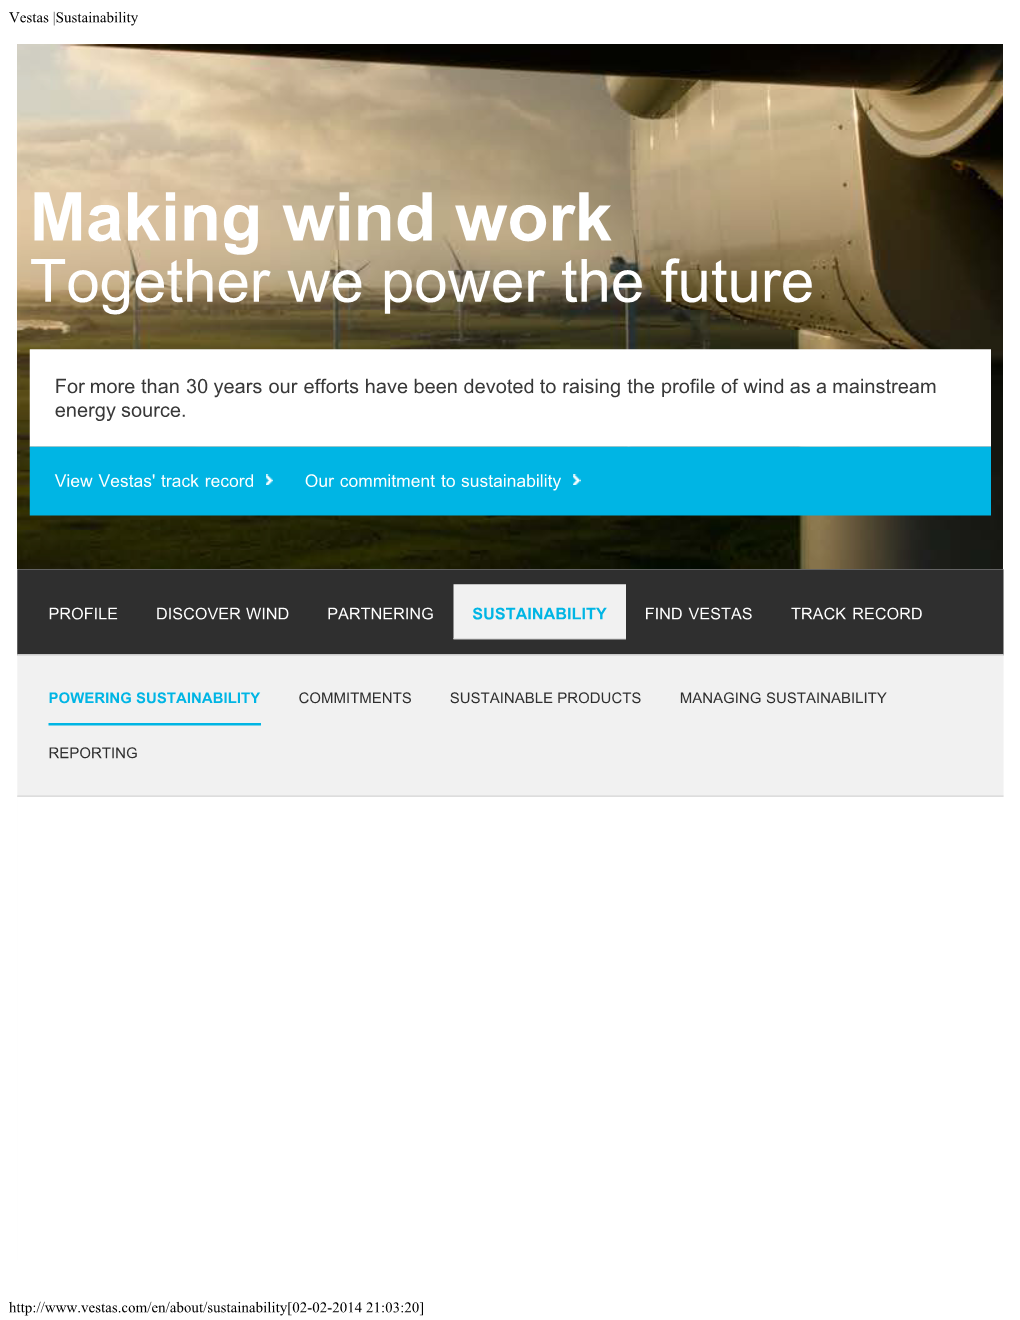 Making Wind Work Together We Power the Future